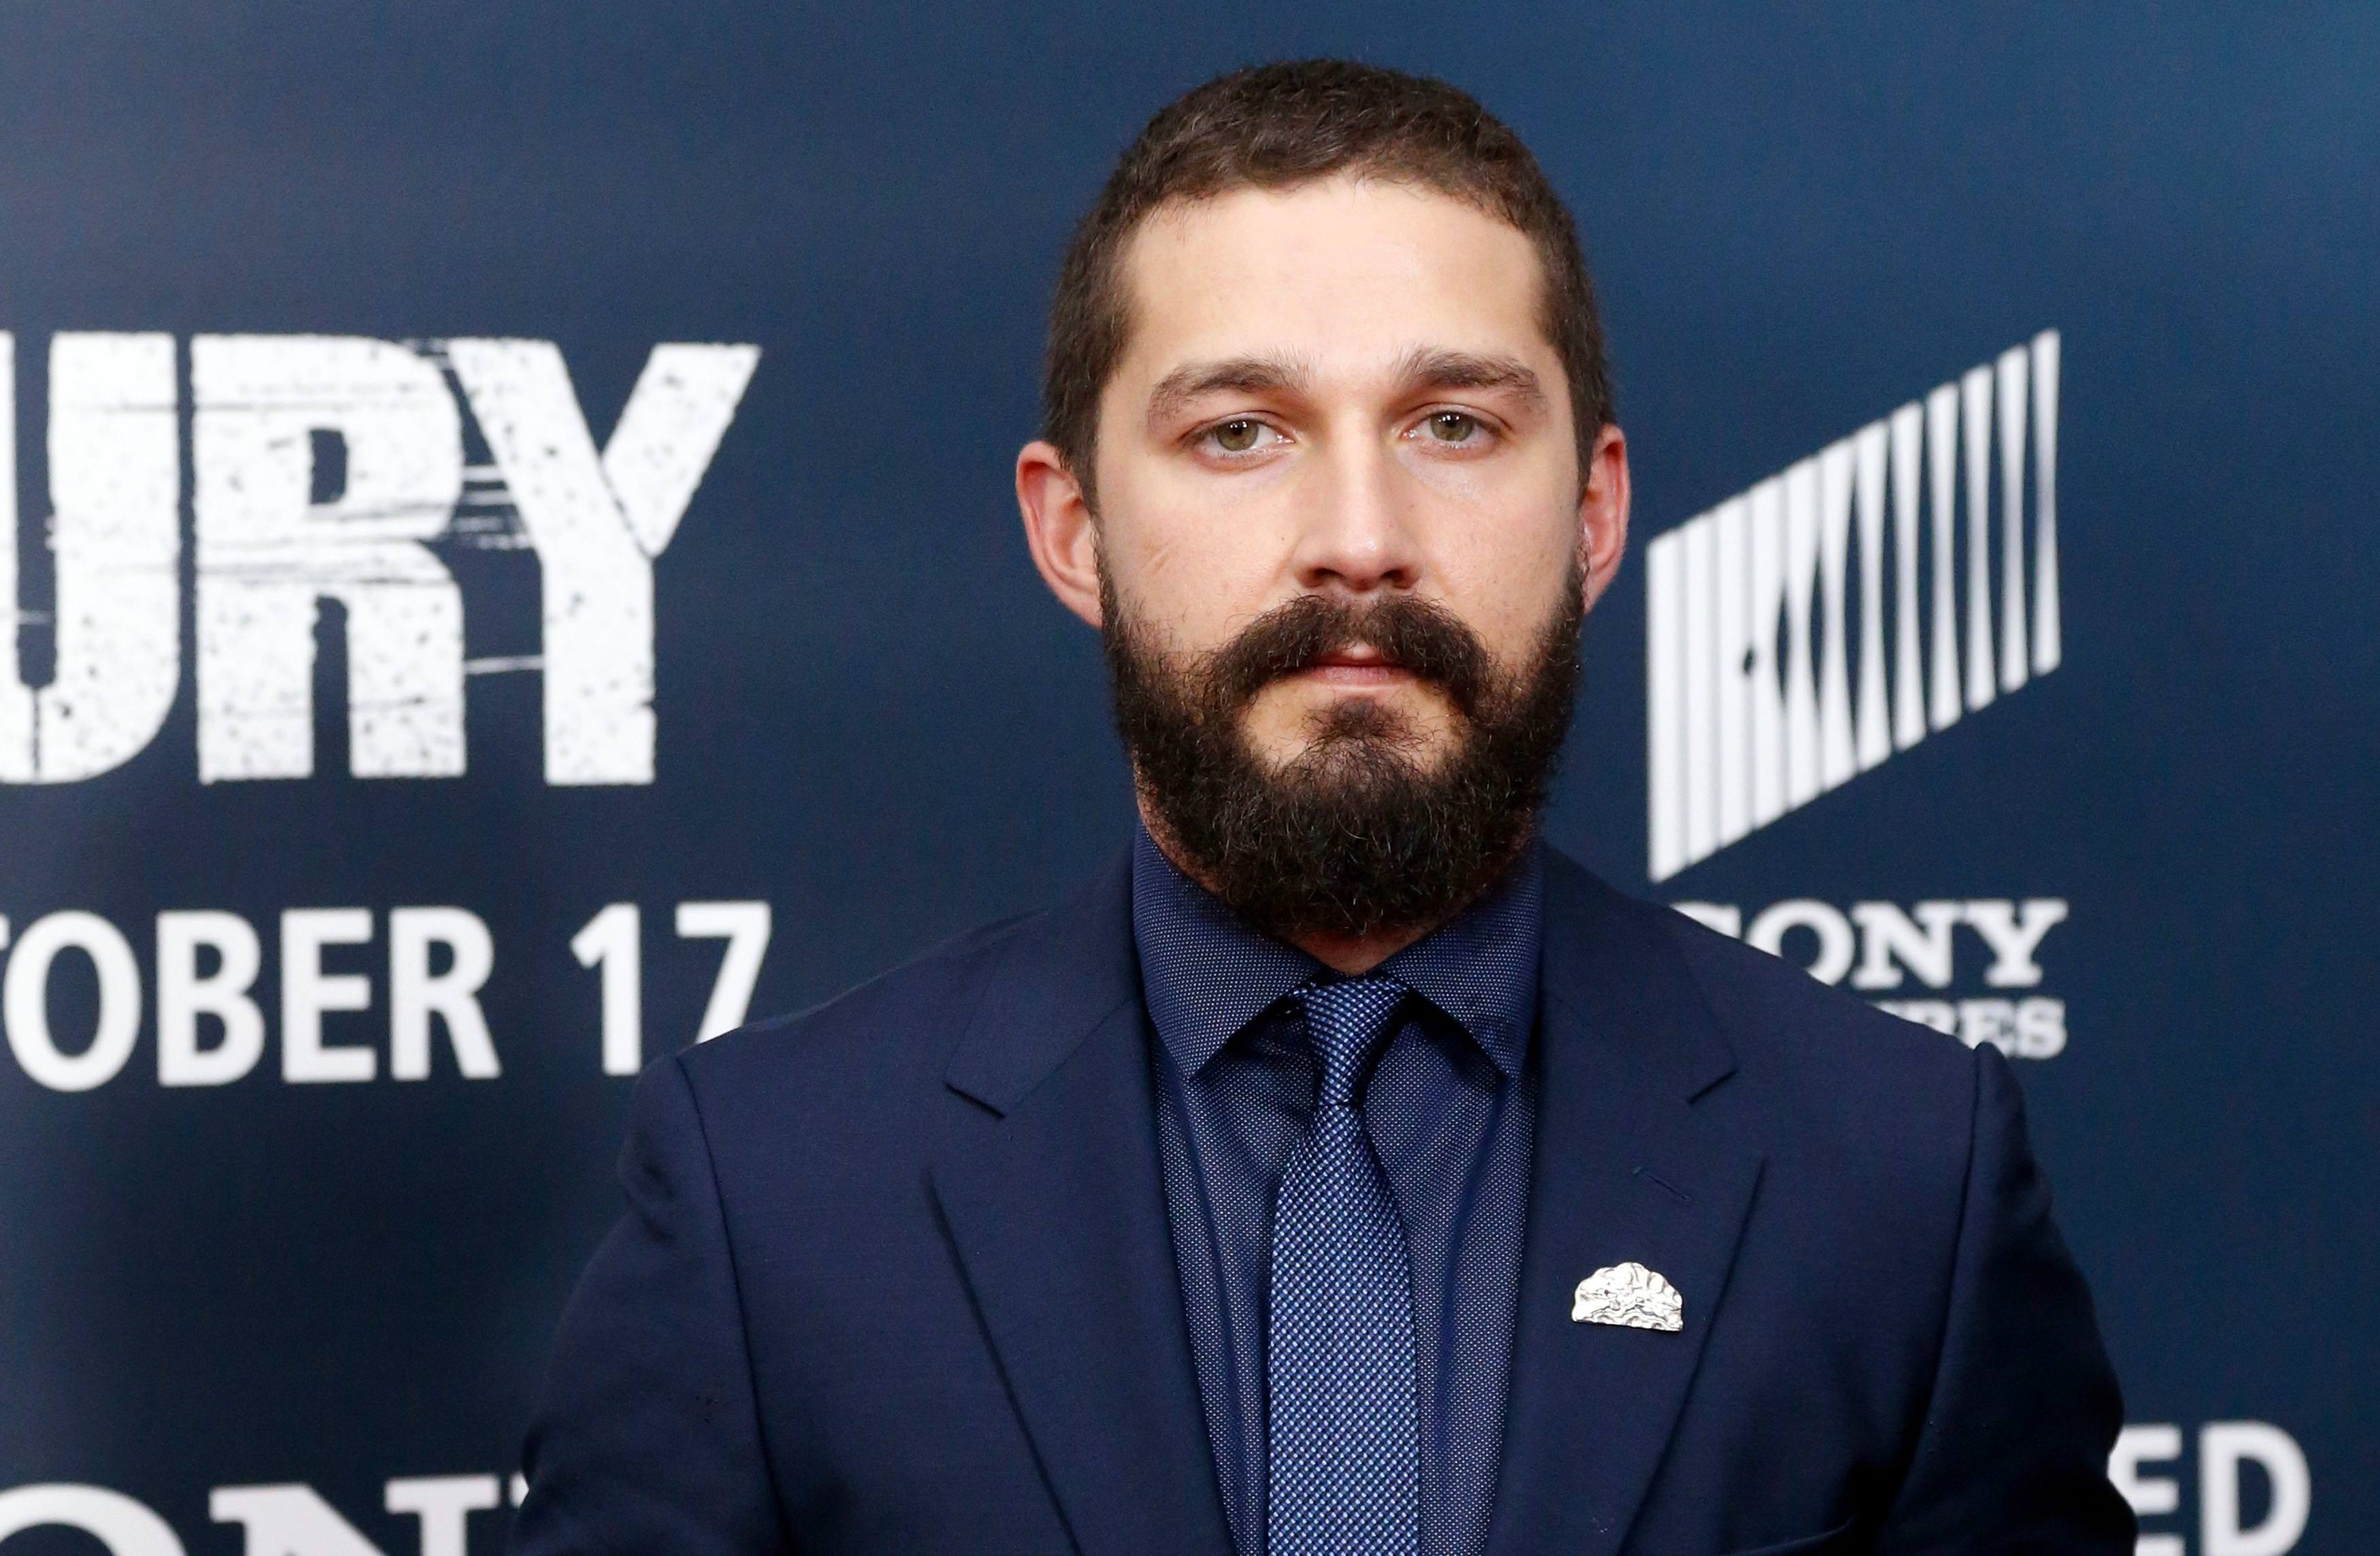 The Many Gaffes Of Shia Labeouf – #4 Scared me